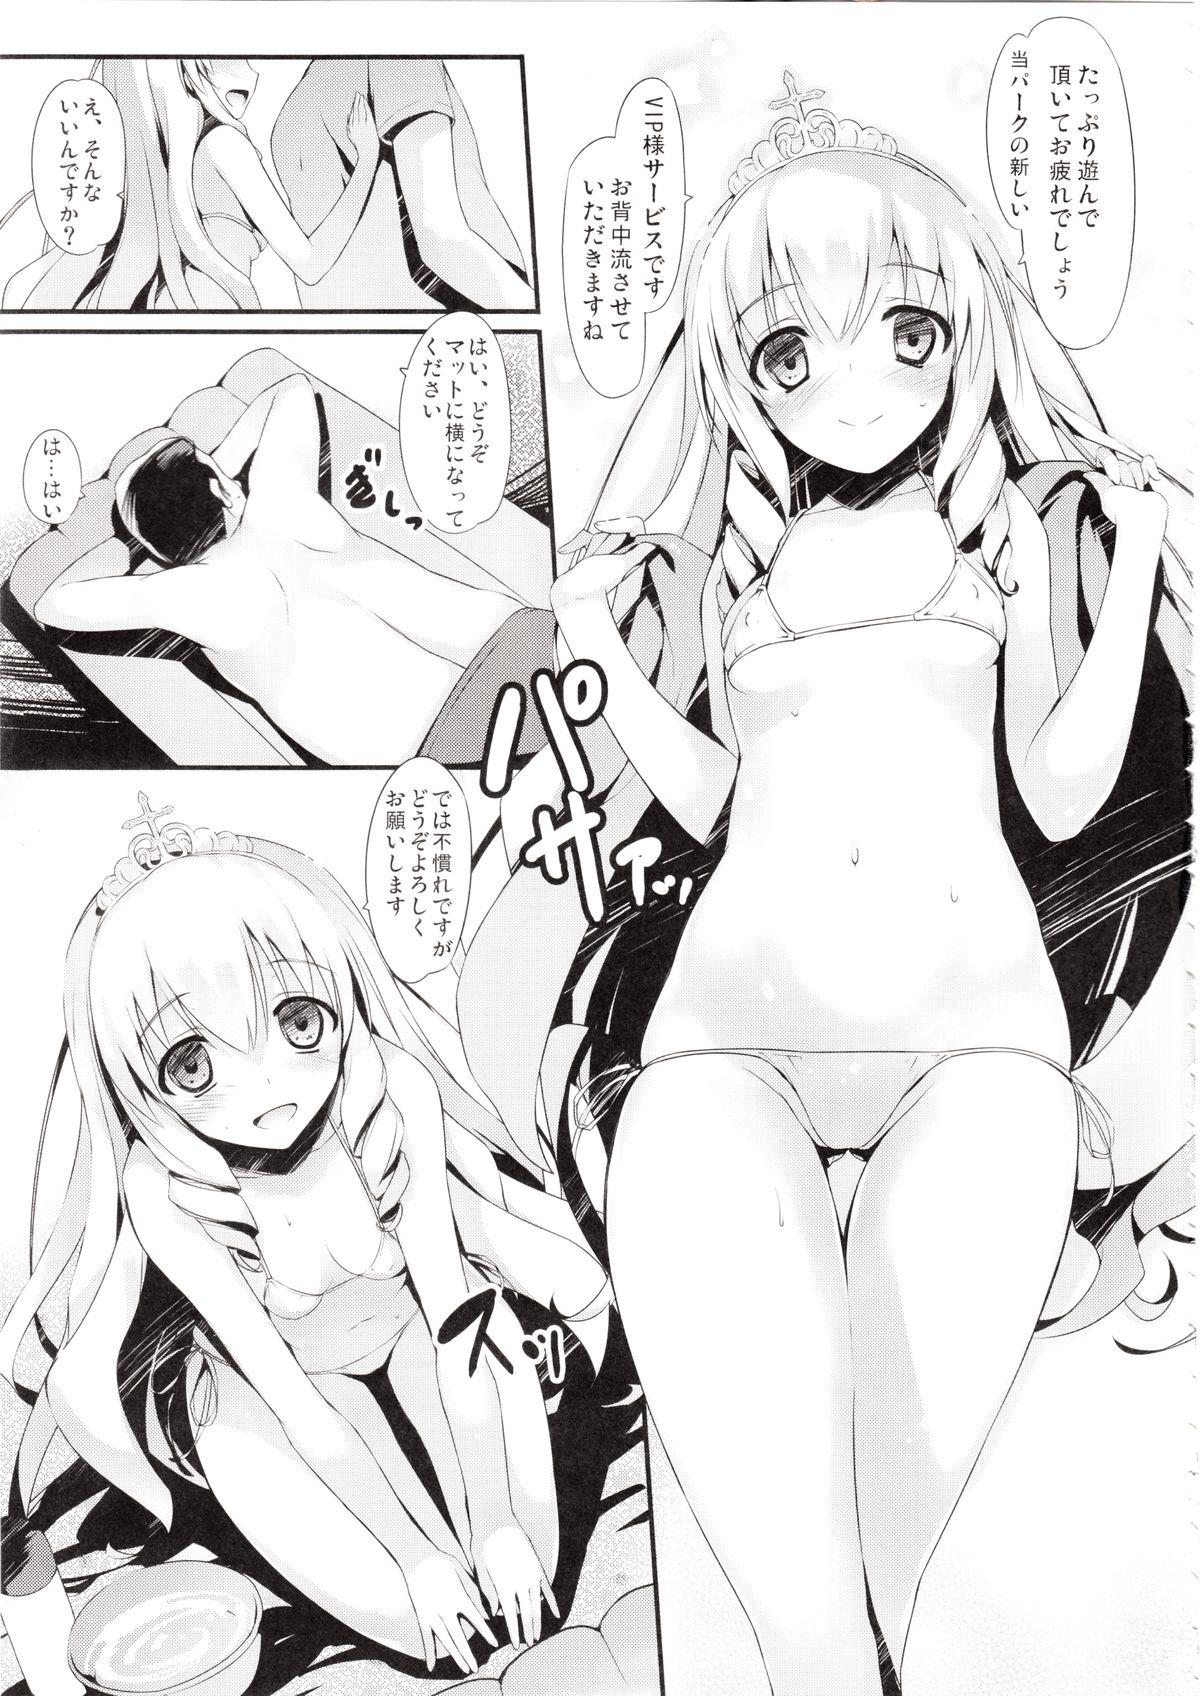 Panty Wellcome to the Sex Park - Amagi brilliant park Cock Suckers - Page 5